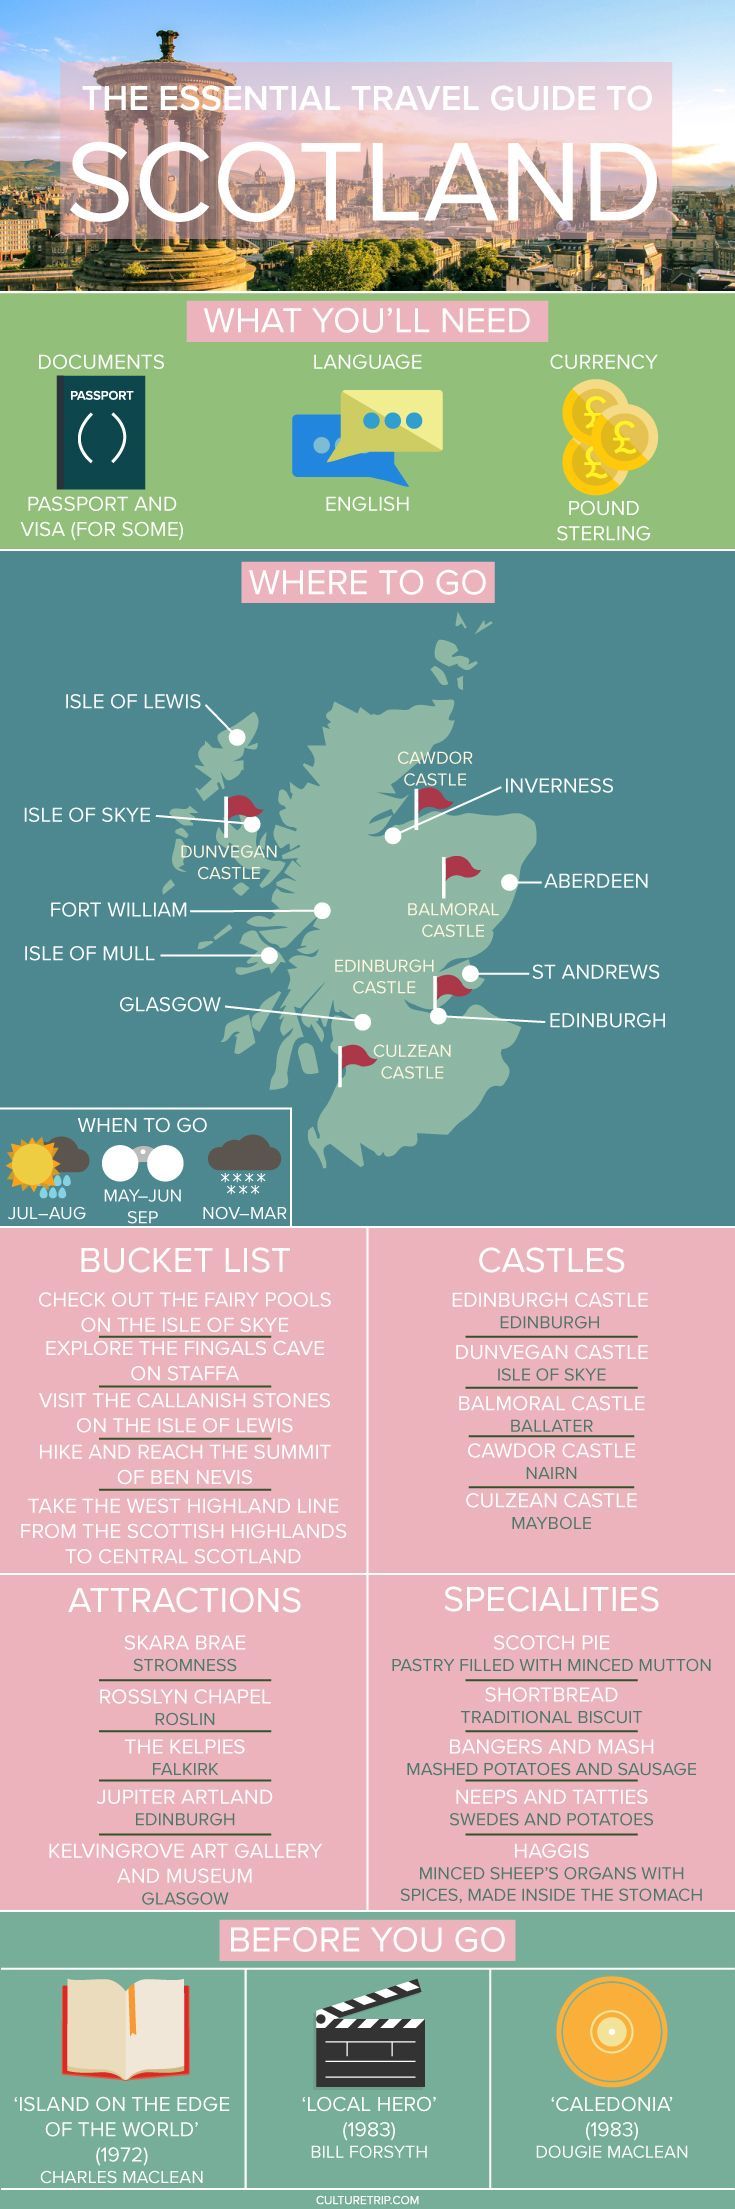 The Essential Travel Guide to Scotland (Infographic)